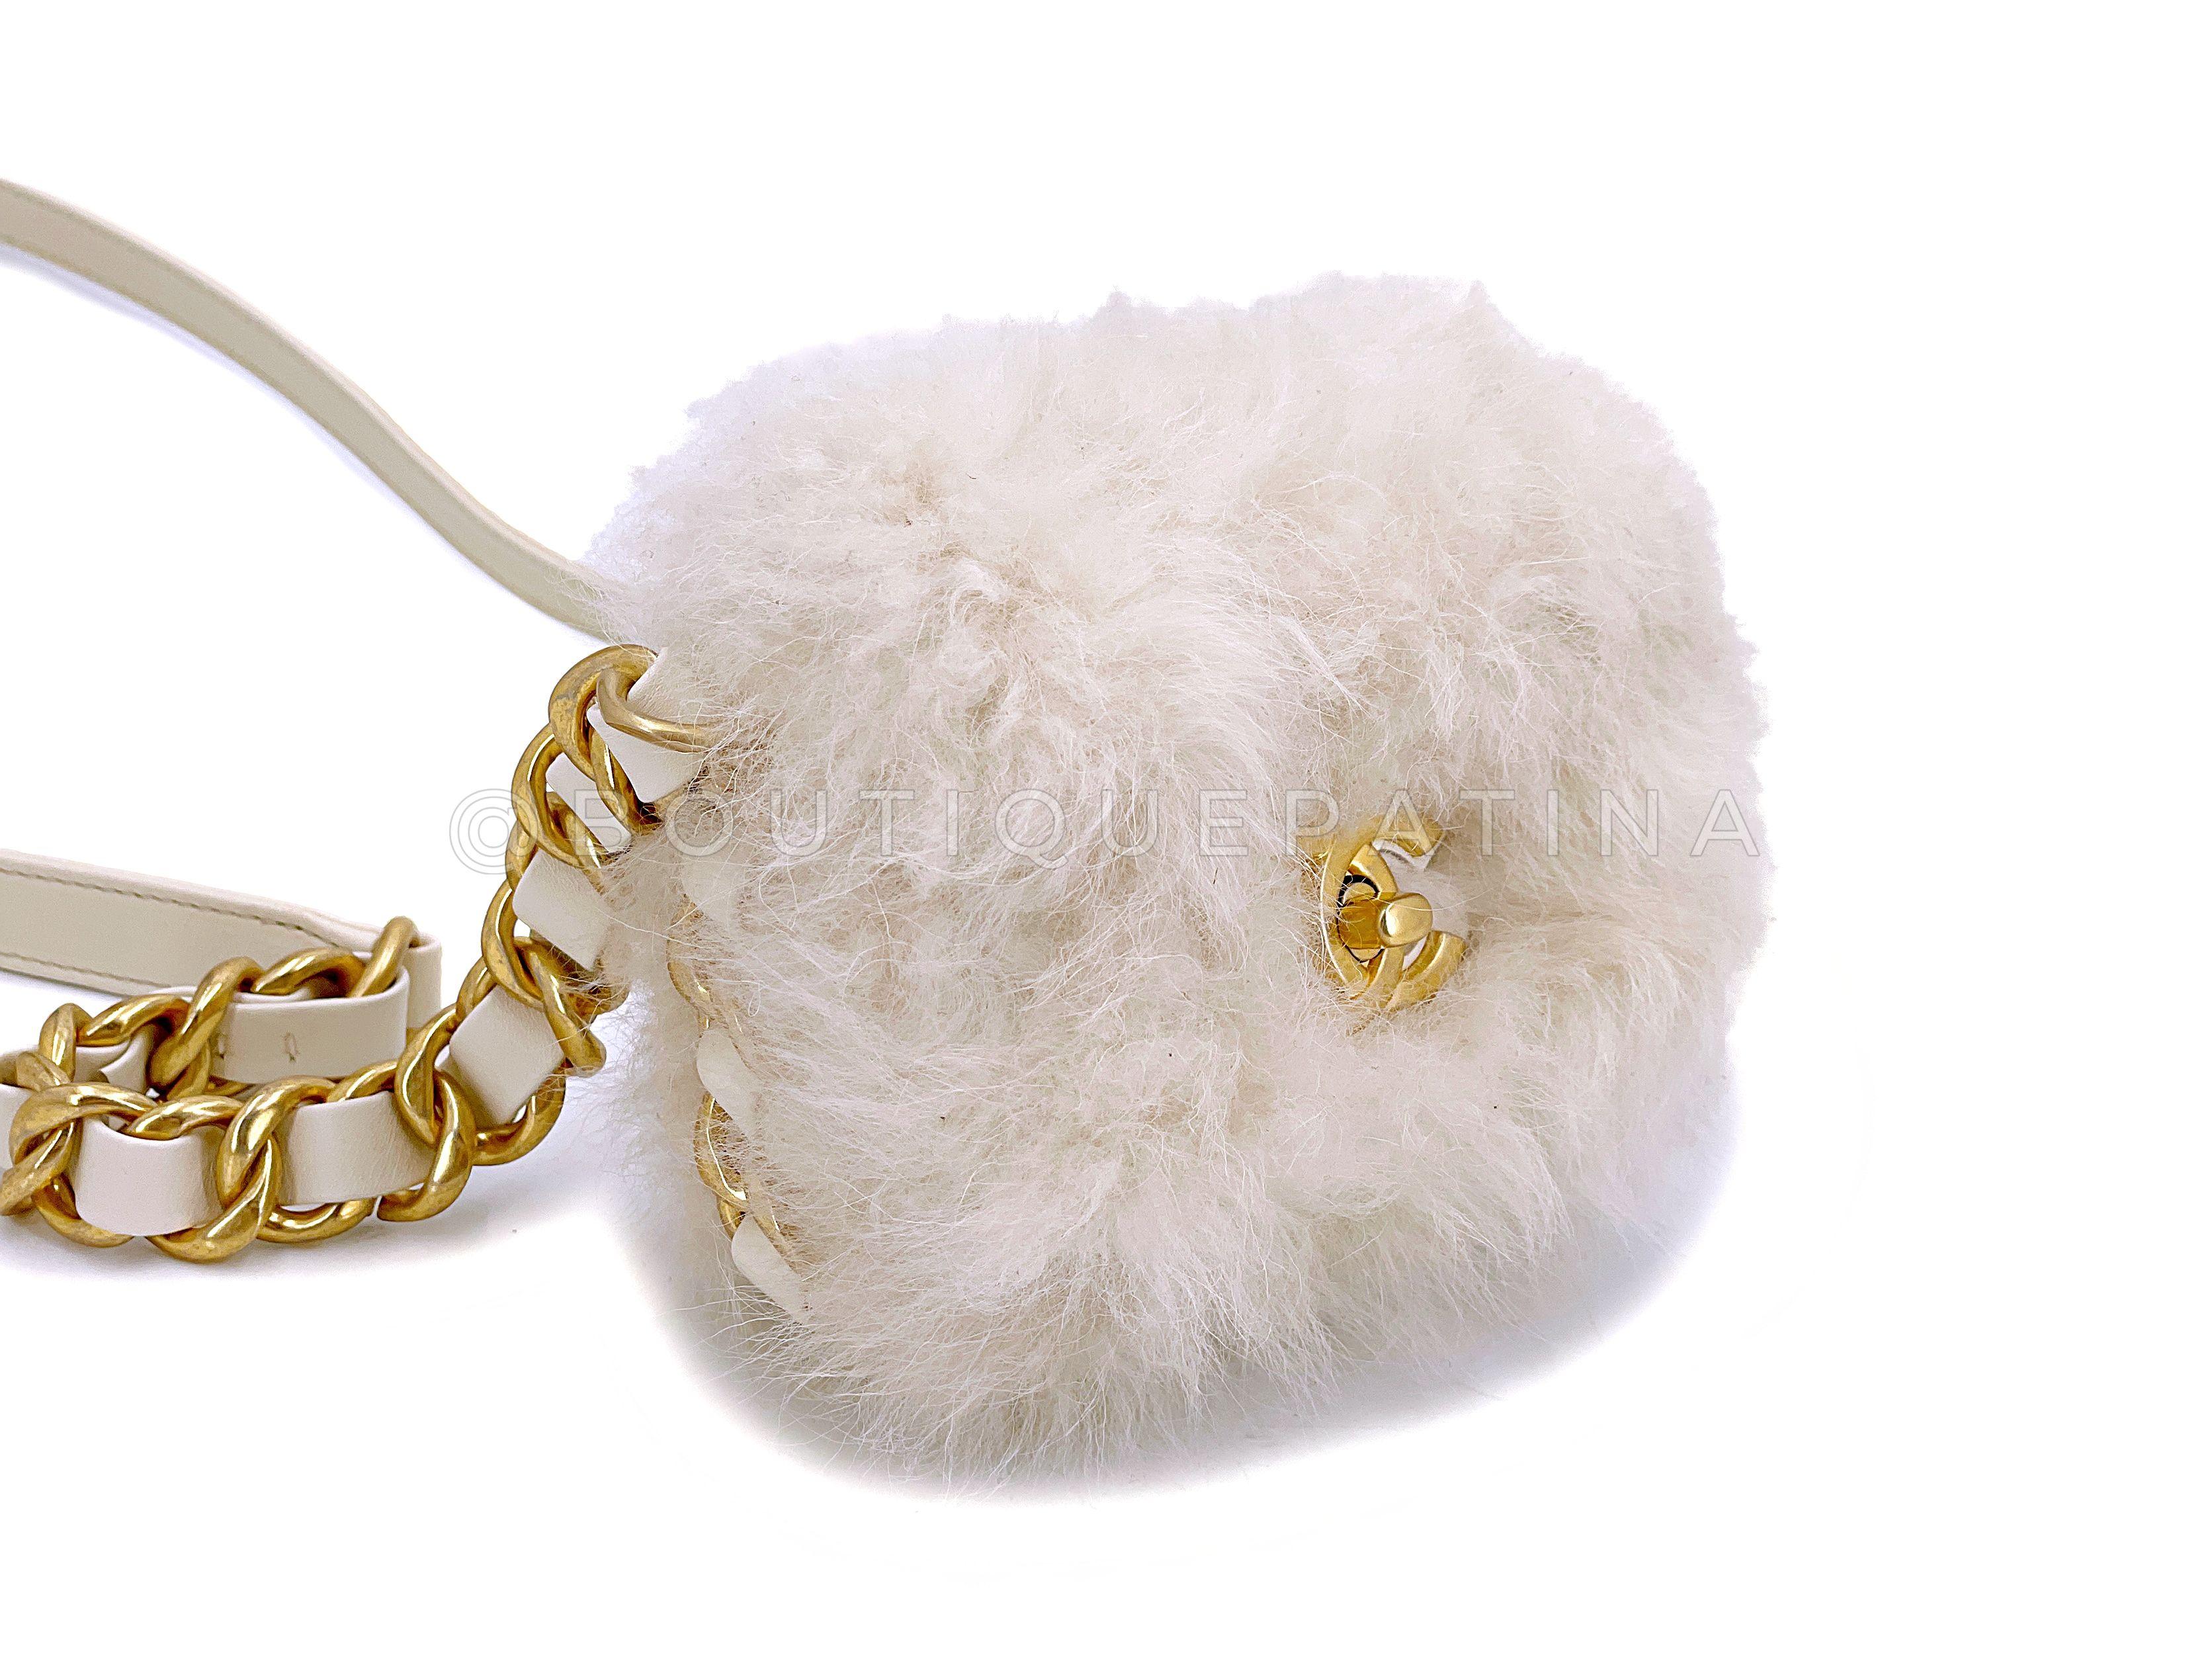 Chanel White Ivory Fur Mini Crossbody Flap Bag Chunky Chain 67242 In Excellent Condition For Sale In Costa Mesa, CA